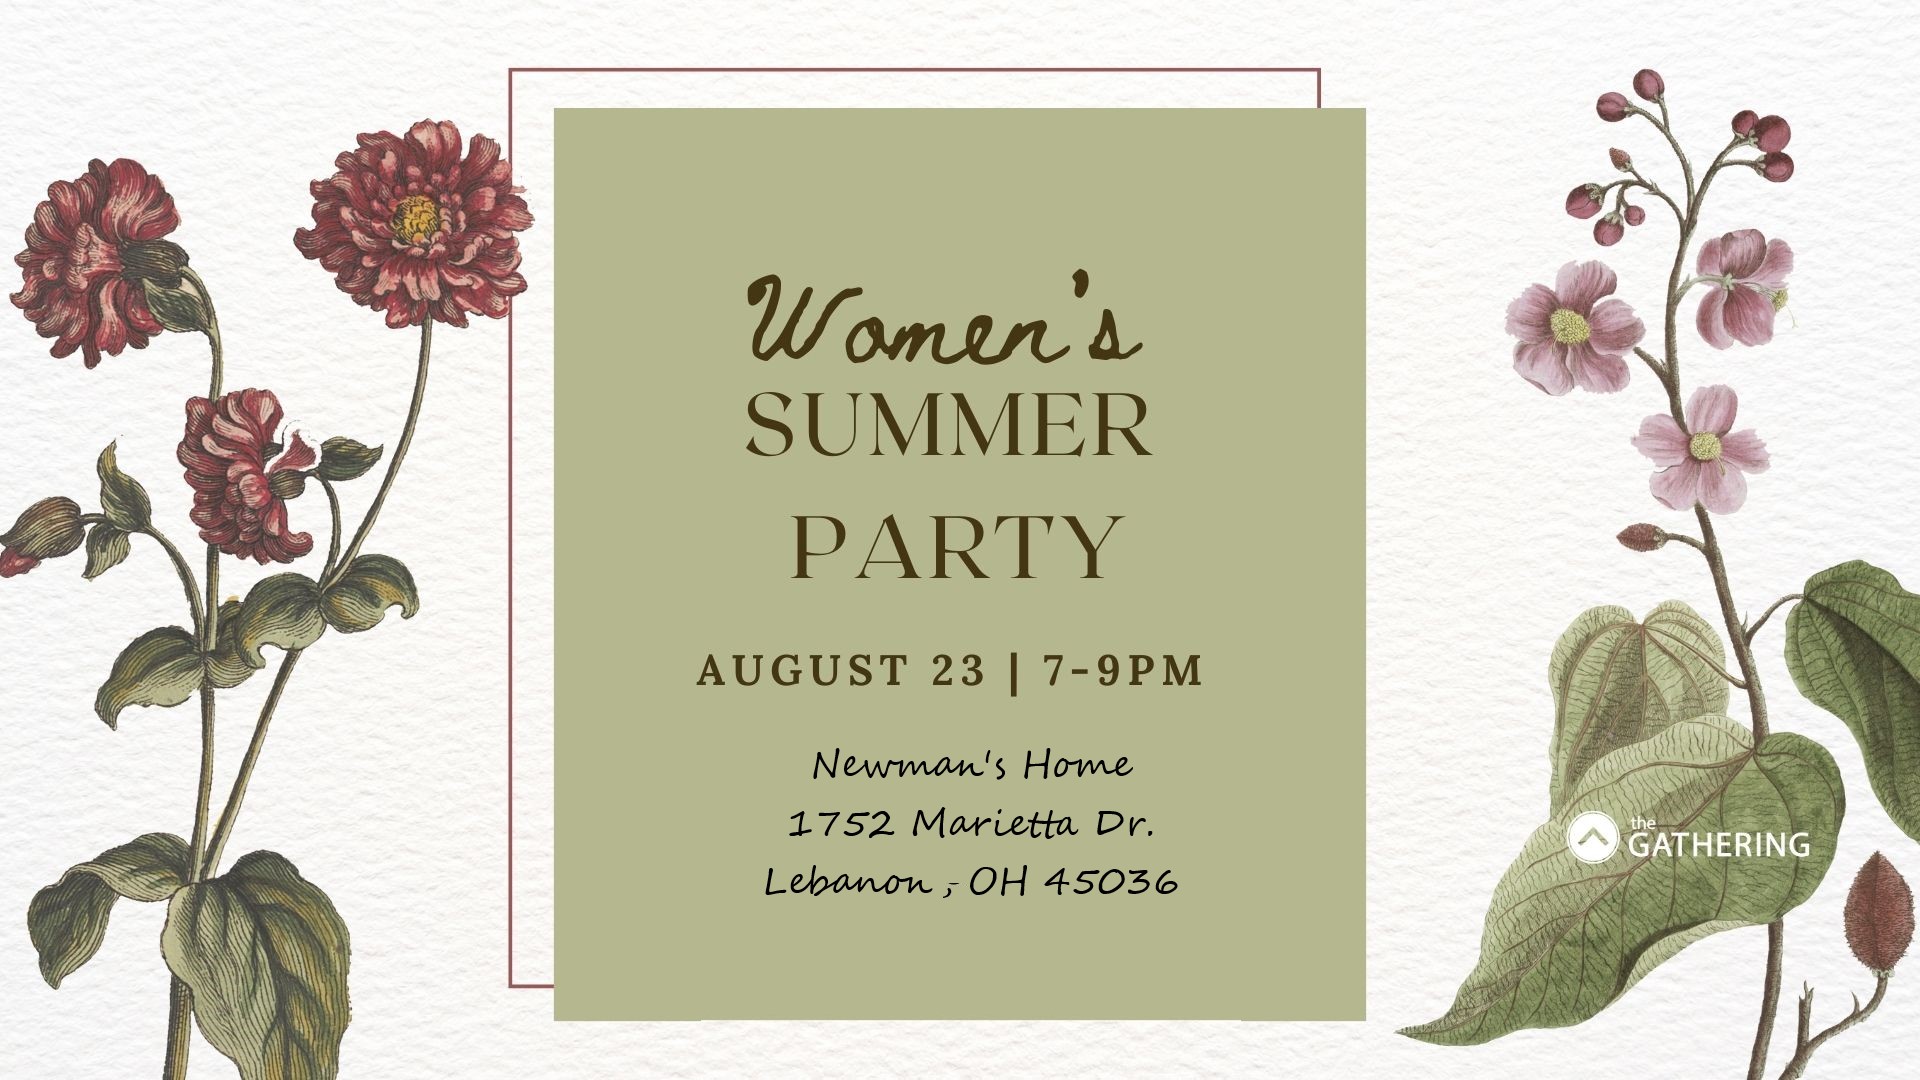 Women's Summer Party updated image